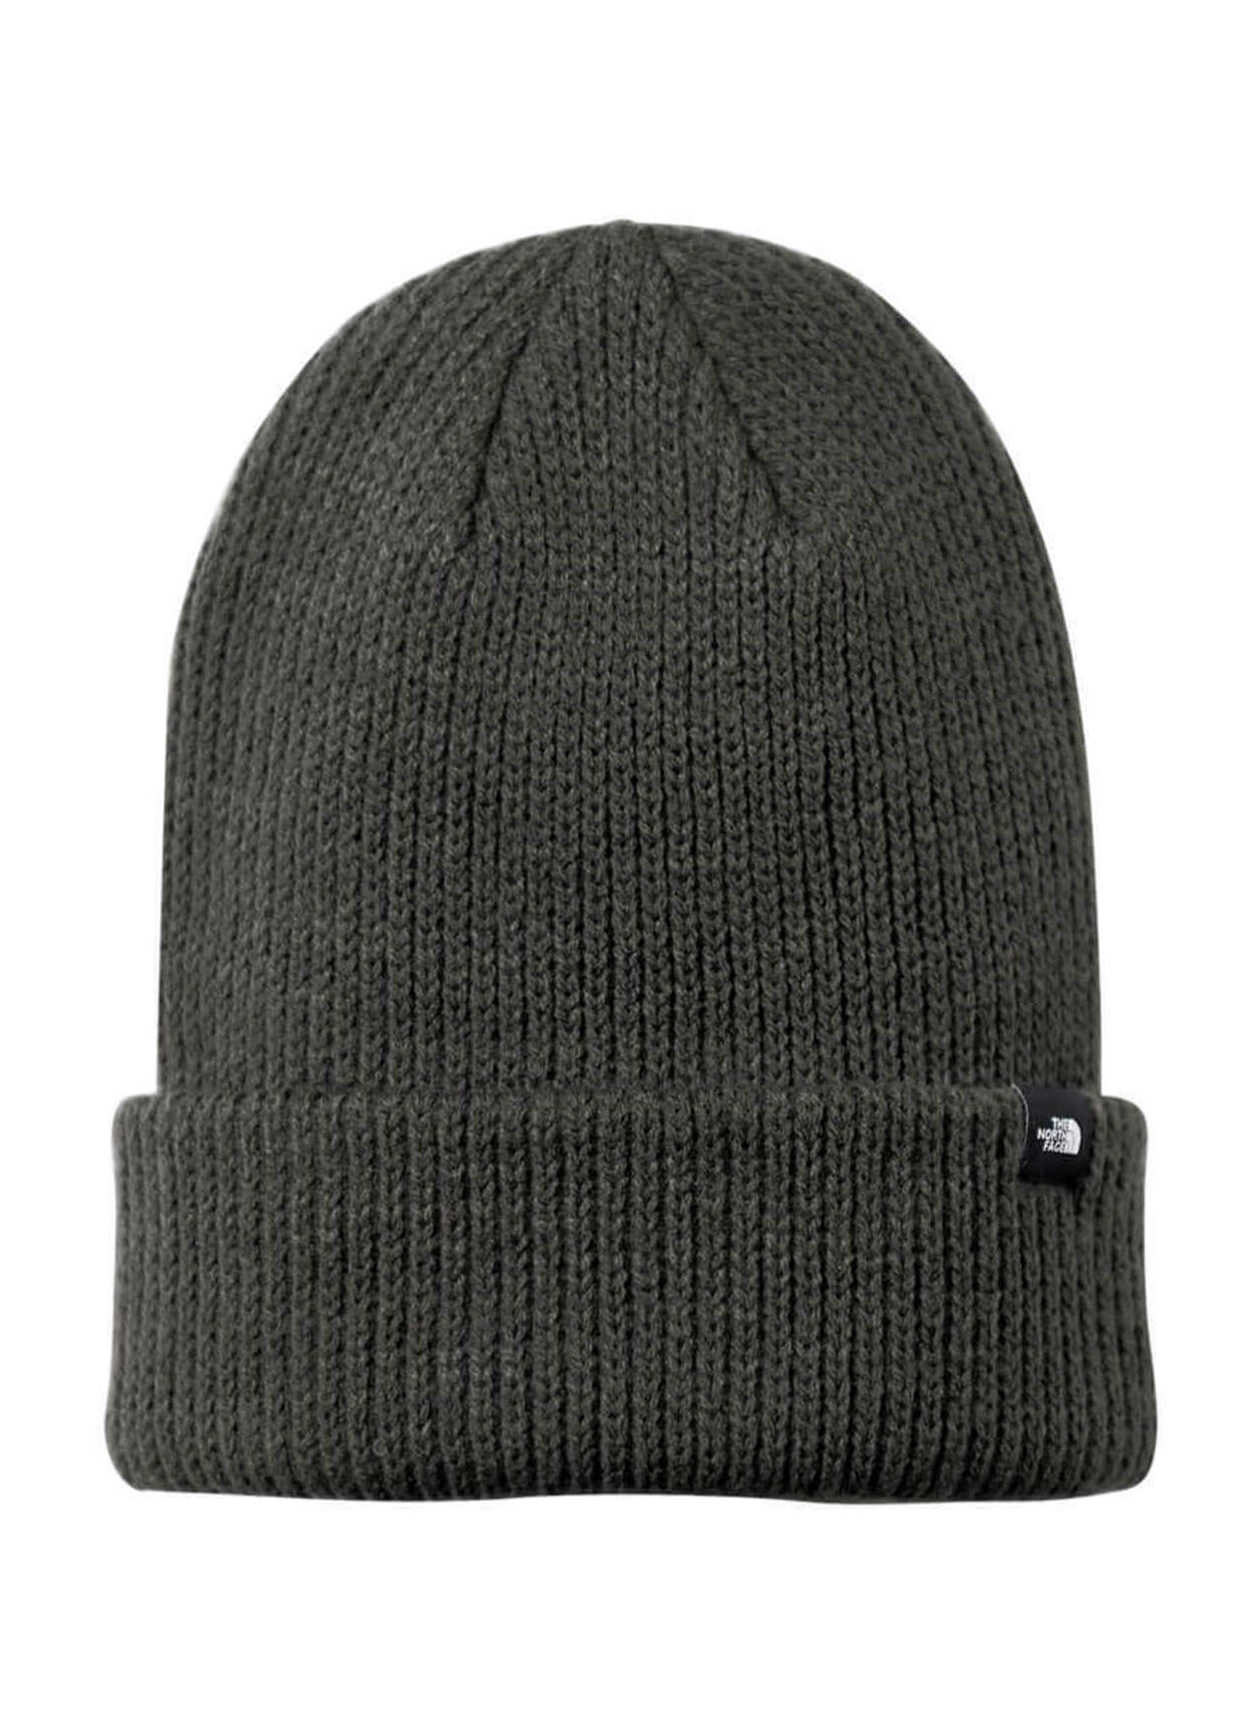 Asphalt Grey The North Face Truckstop Beanie | The North Face